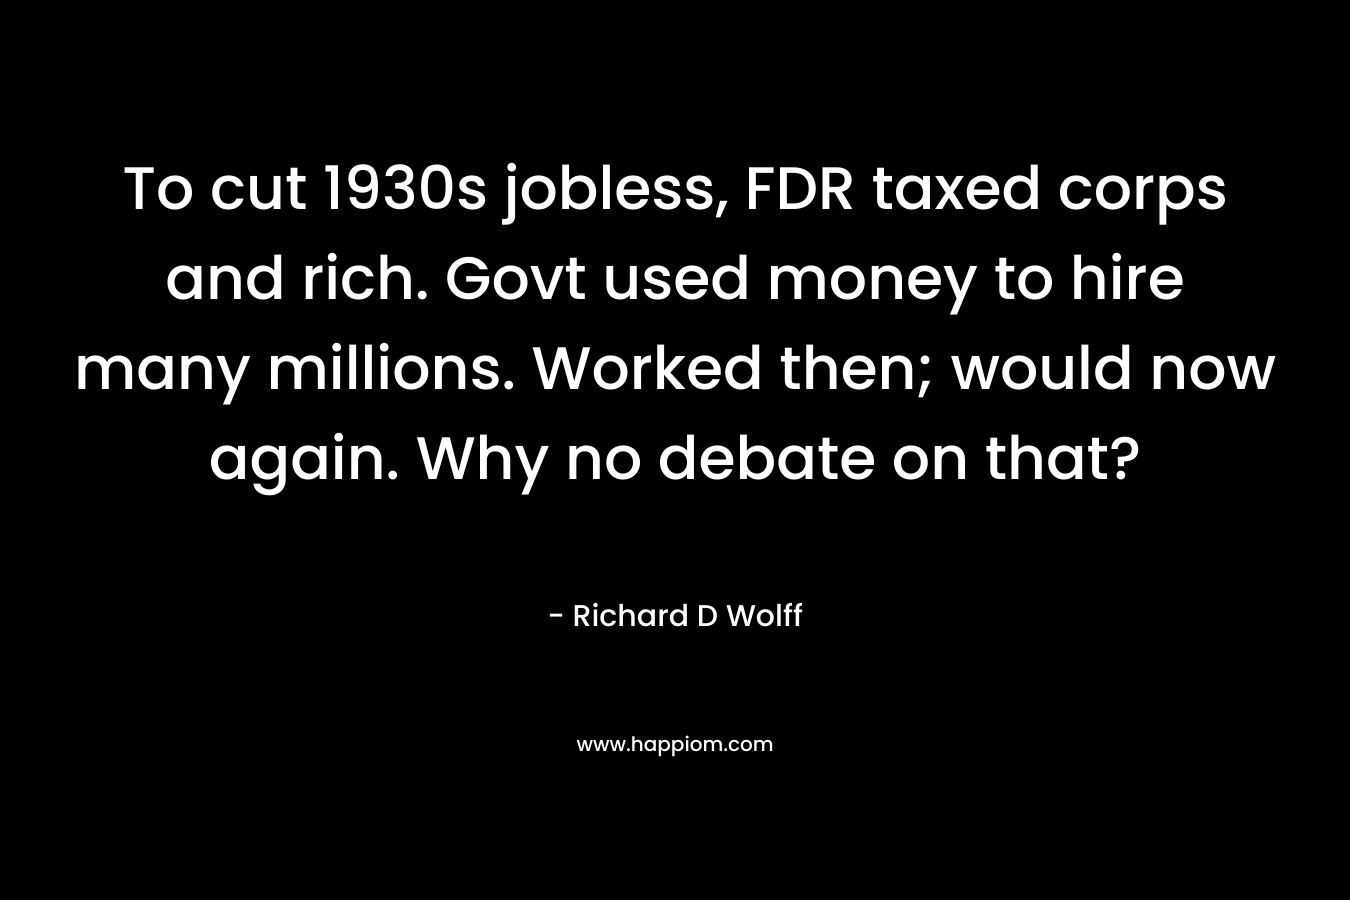 To cut 1930s jobless, FDR taxed corps and rich. Govt used money to hire many millions. Worked then; would now again. Why no debate on that? – Richard D Wolff